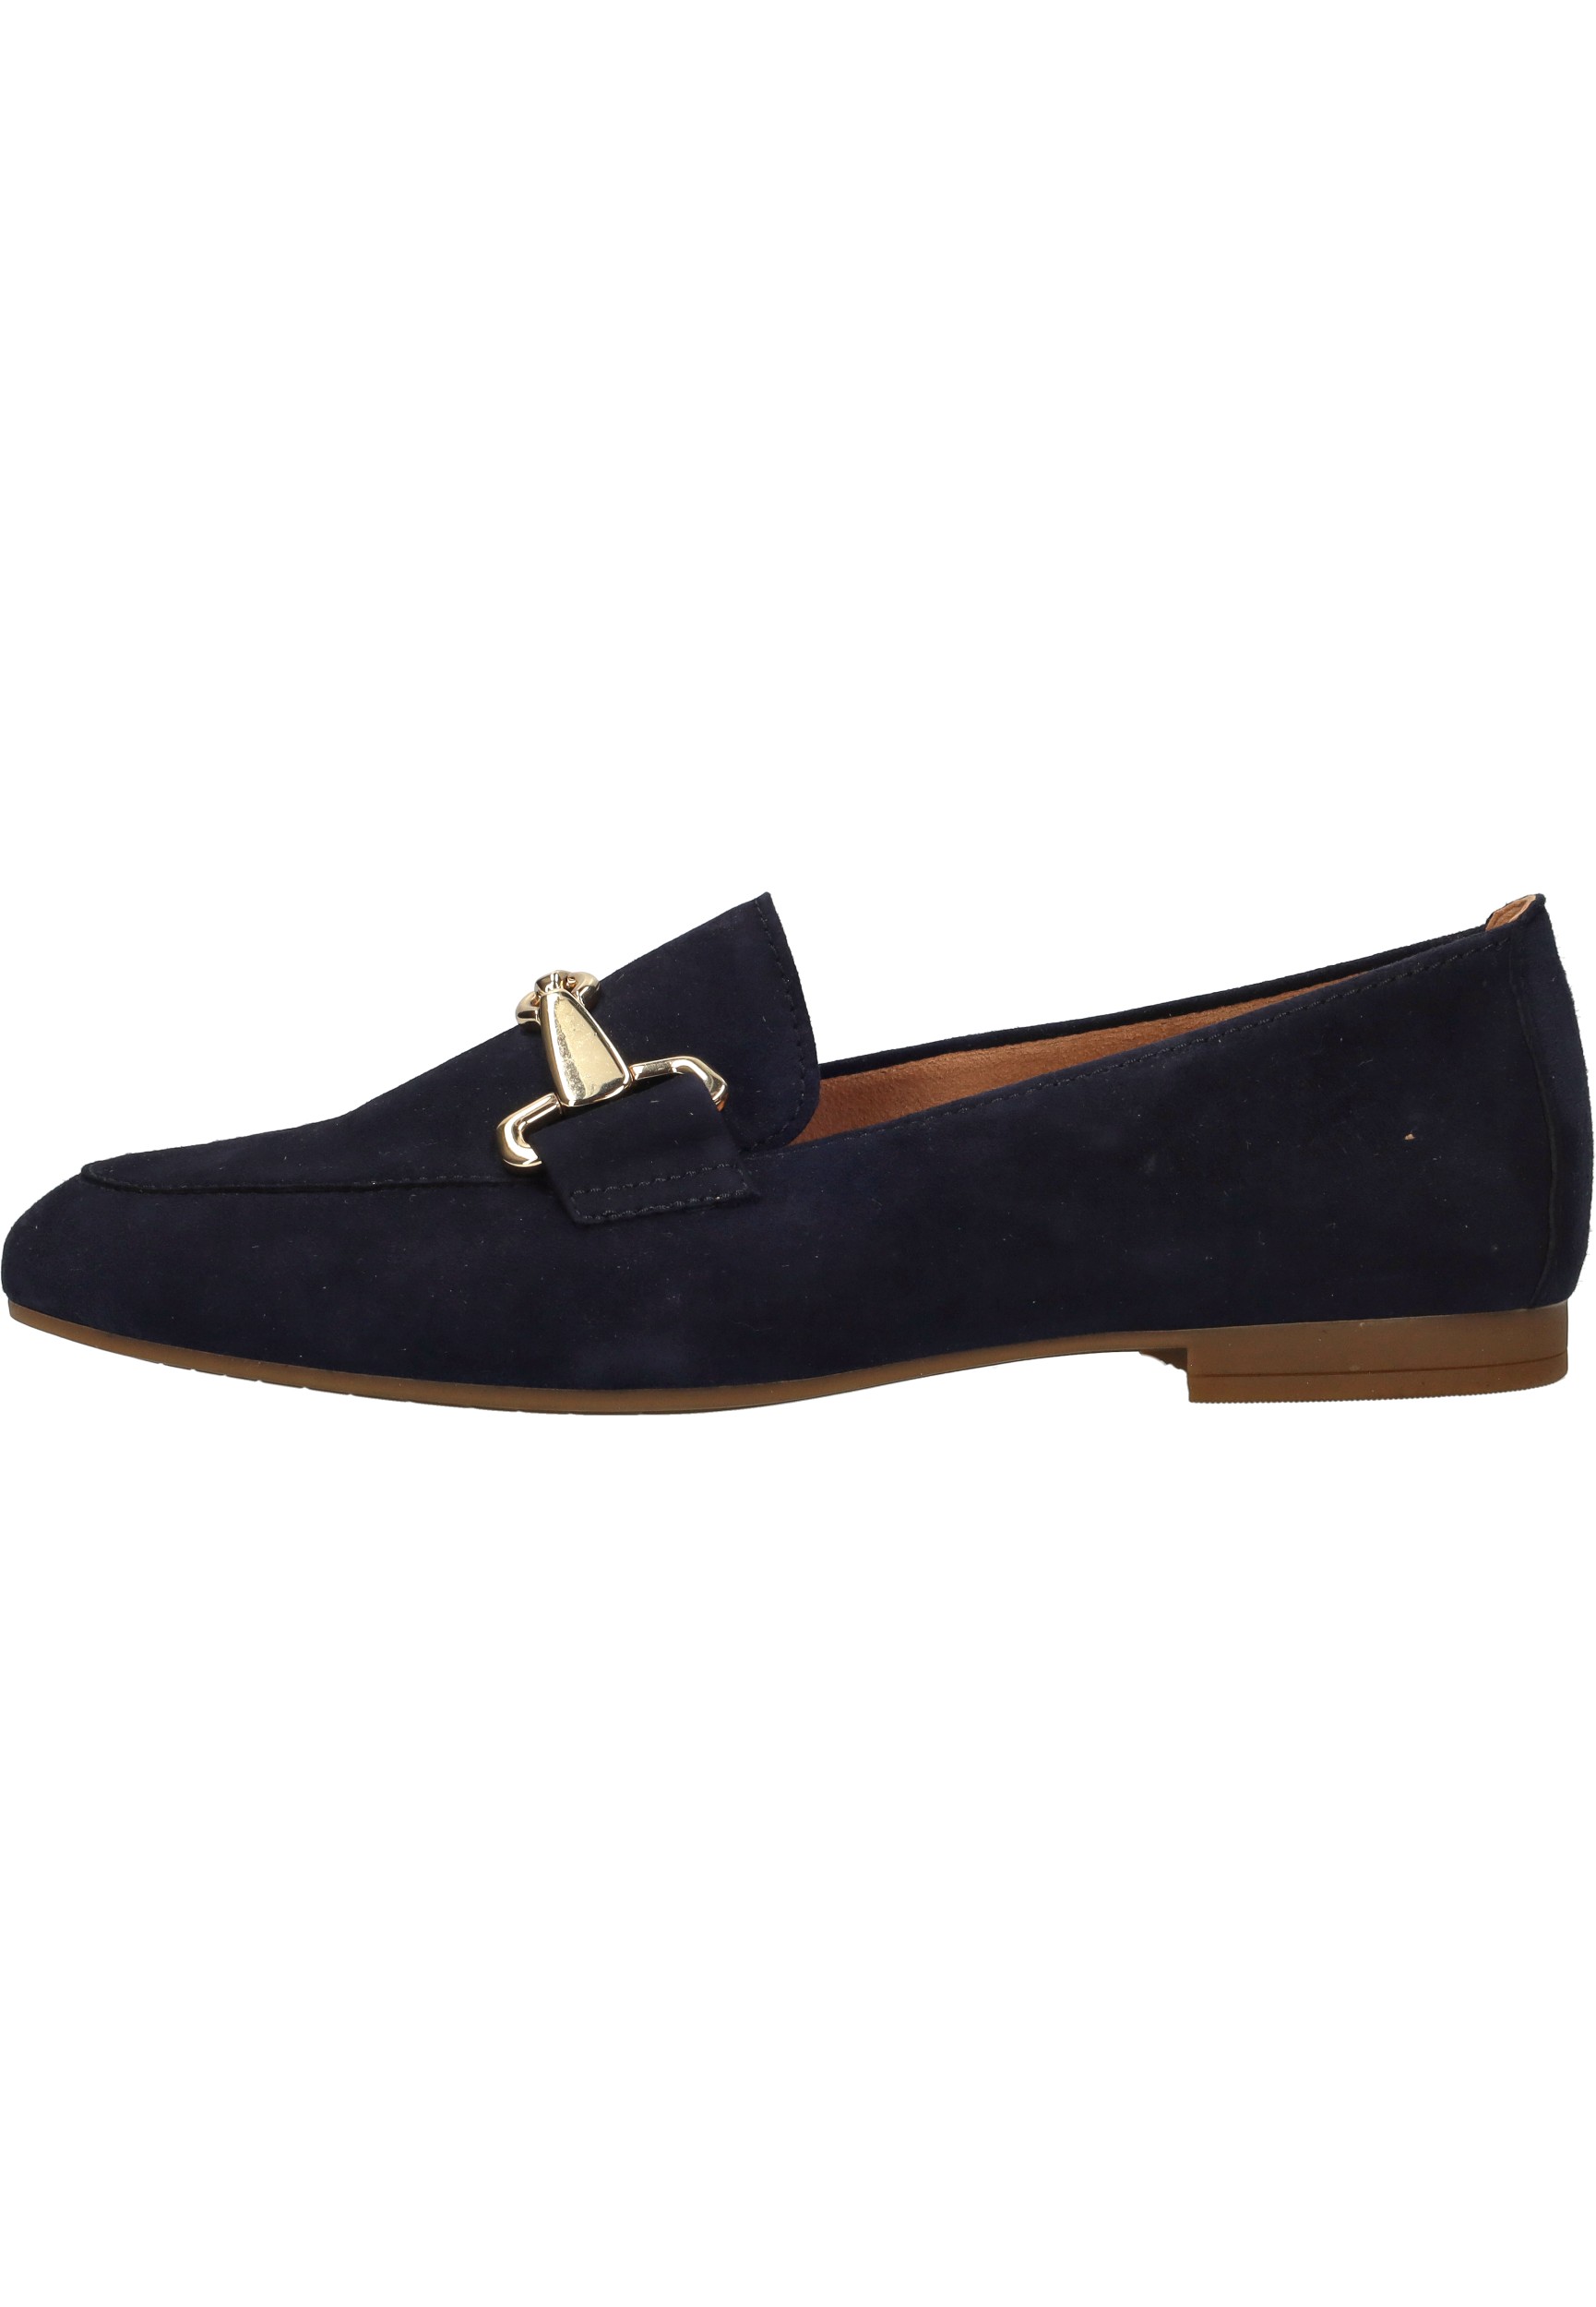 Gabor dames loafer - Donkerblauw - Maat 37